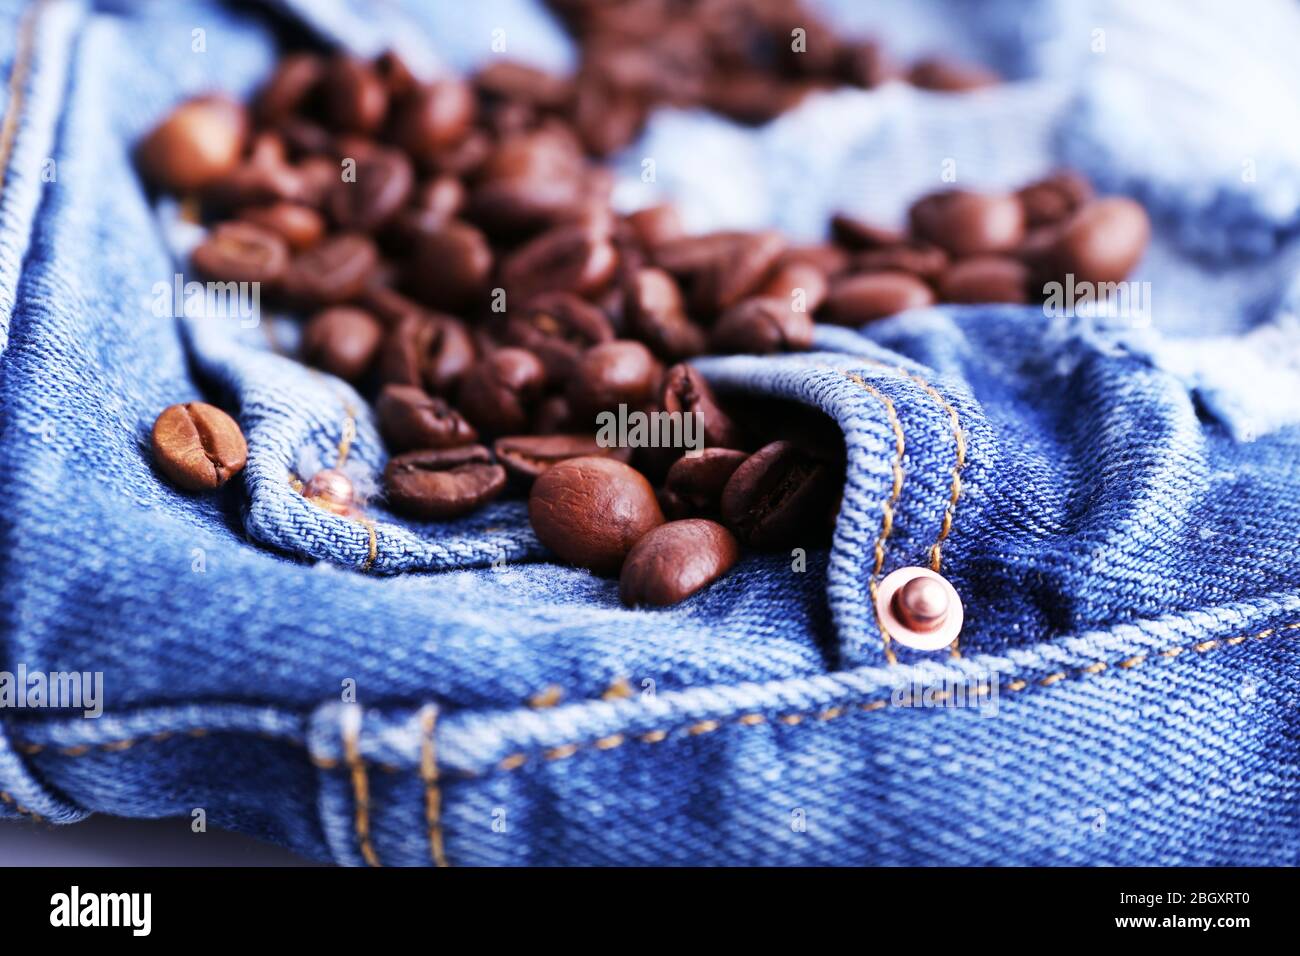 Handful of coffee beans on ripped jeans background Stock Photo - Alamy